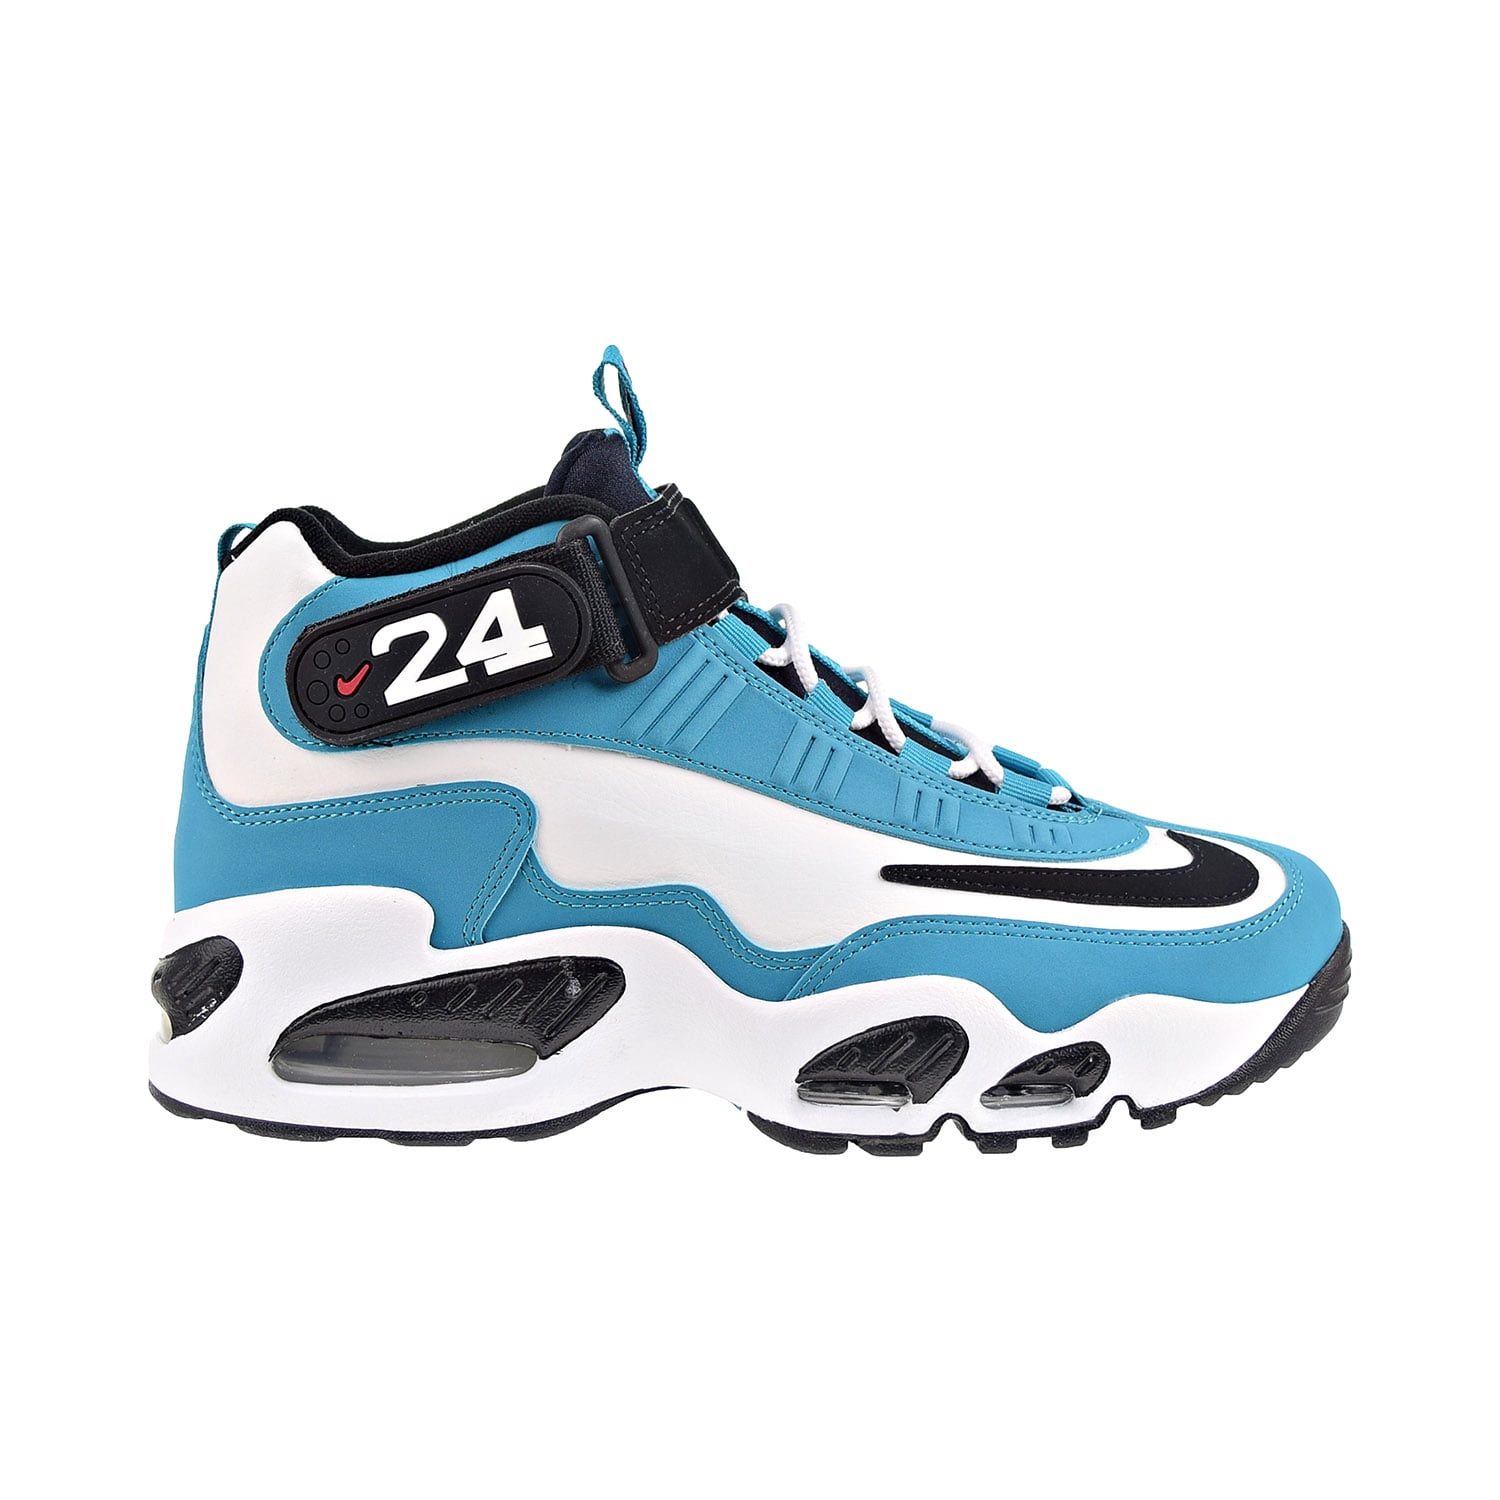 History of the Nike Air Griffey Max 1